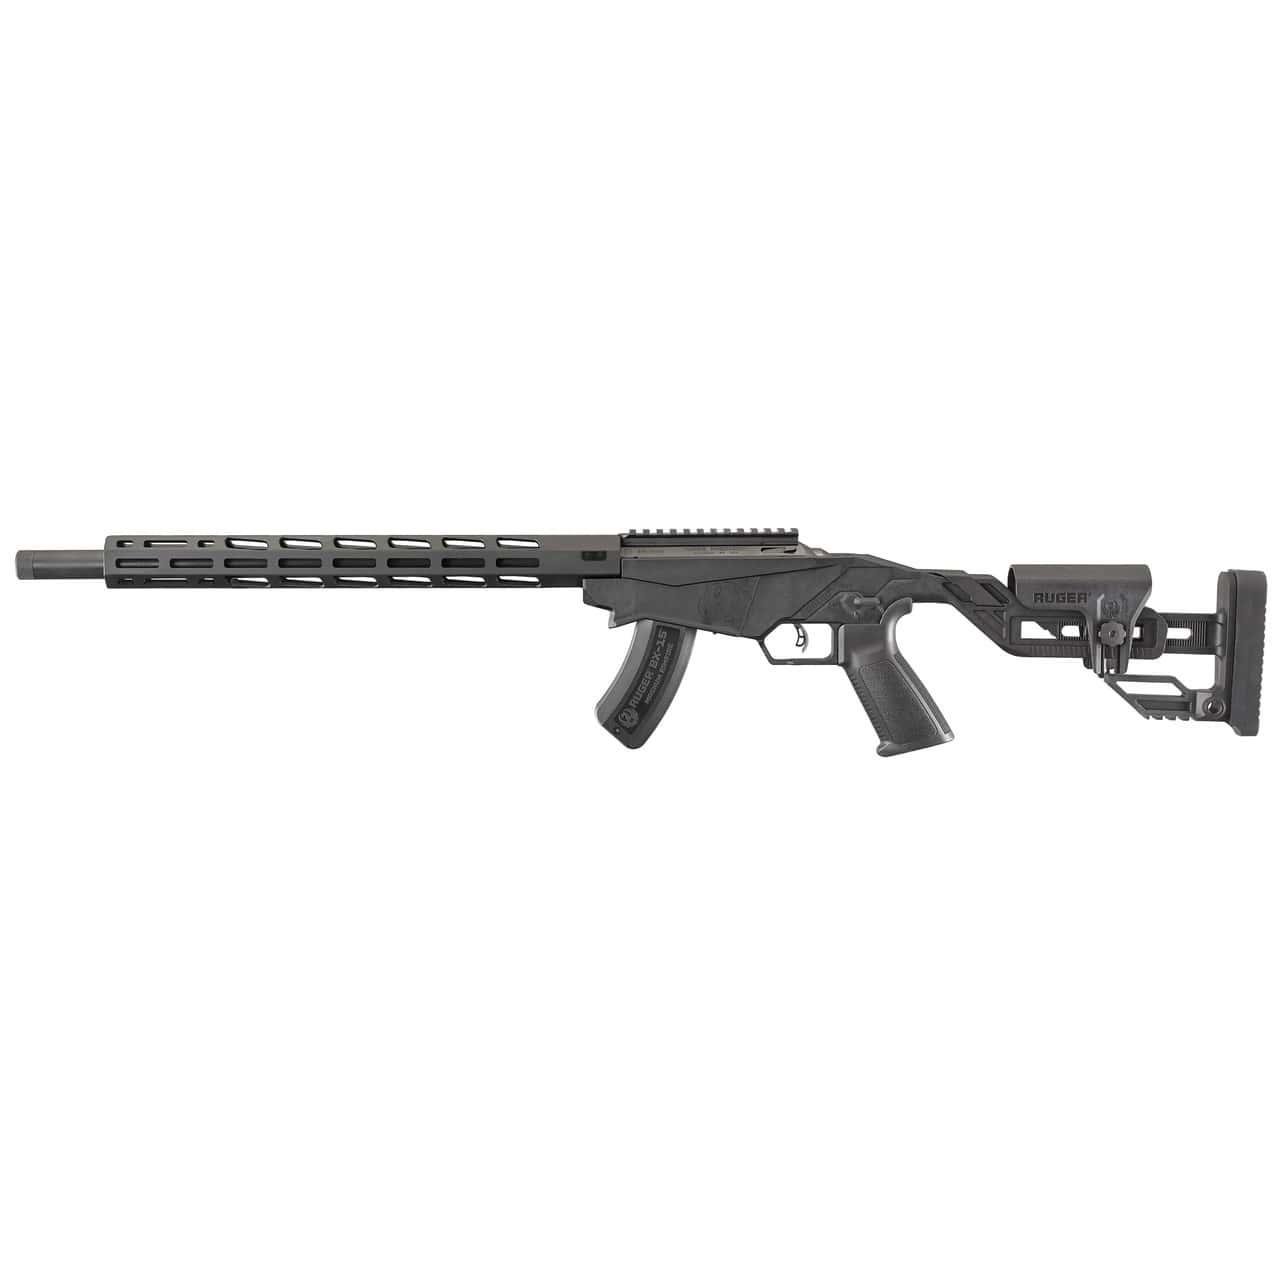 Ruger 8405 Precision Rimfire Bolt 22 WMR 18" 9+1 Black Adjustable Quick-Fit Precision w/One-Piece Chassis Stock Black - $459.99